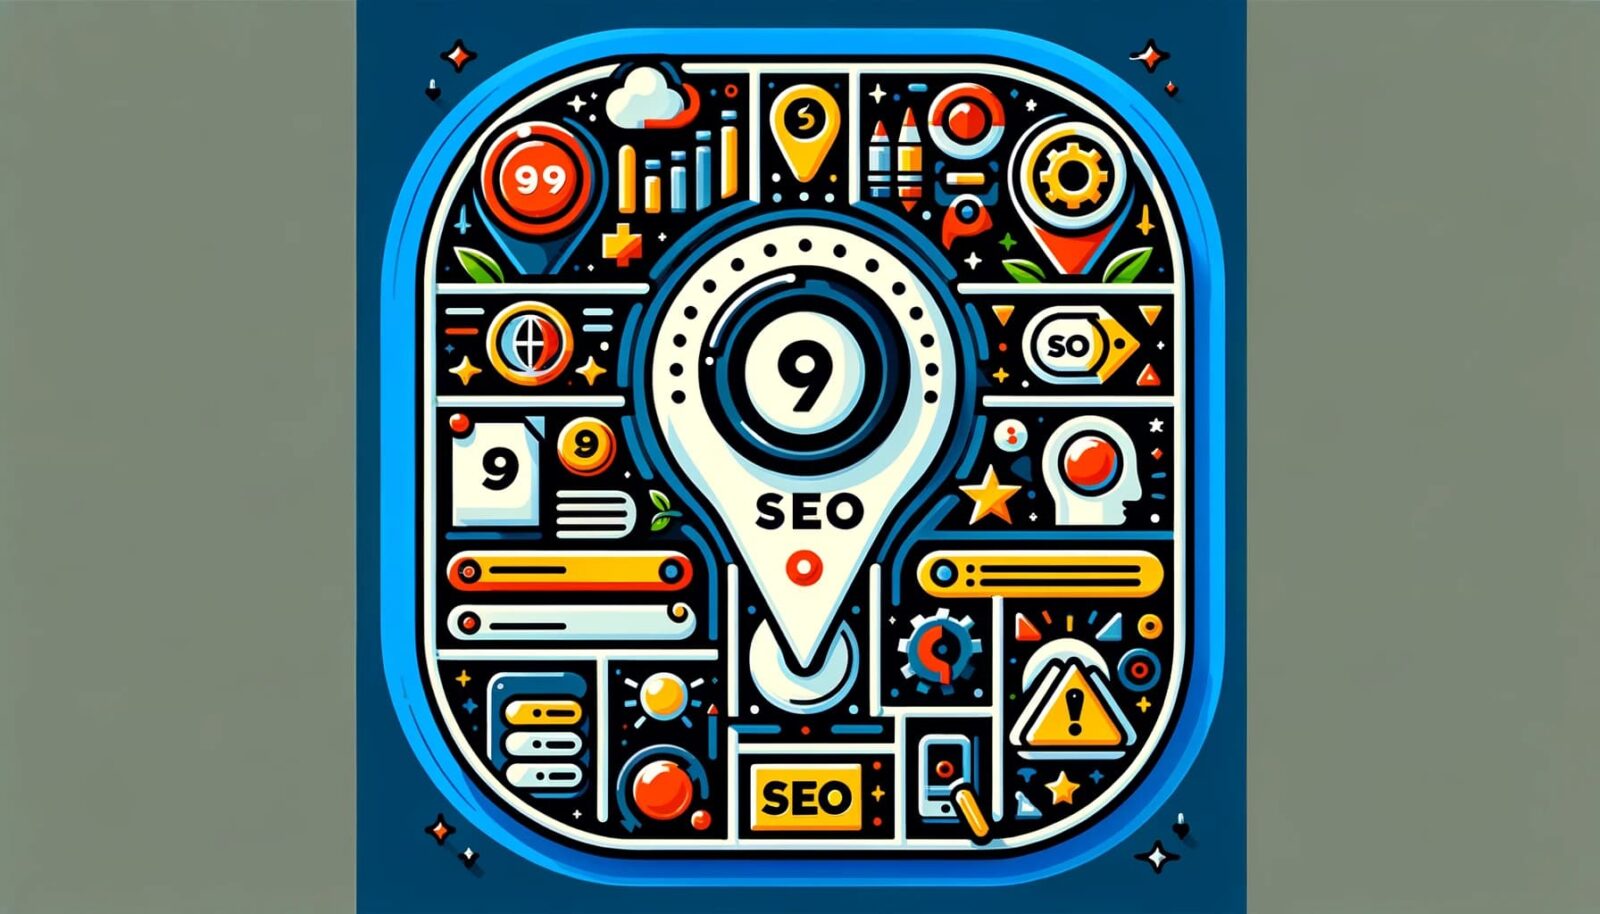 “9 On-Page SEO Factors You Can't Ignore”.